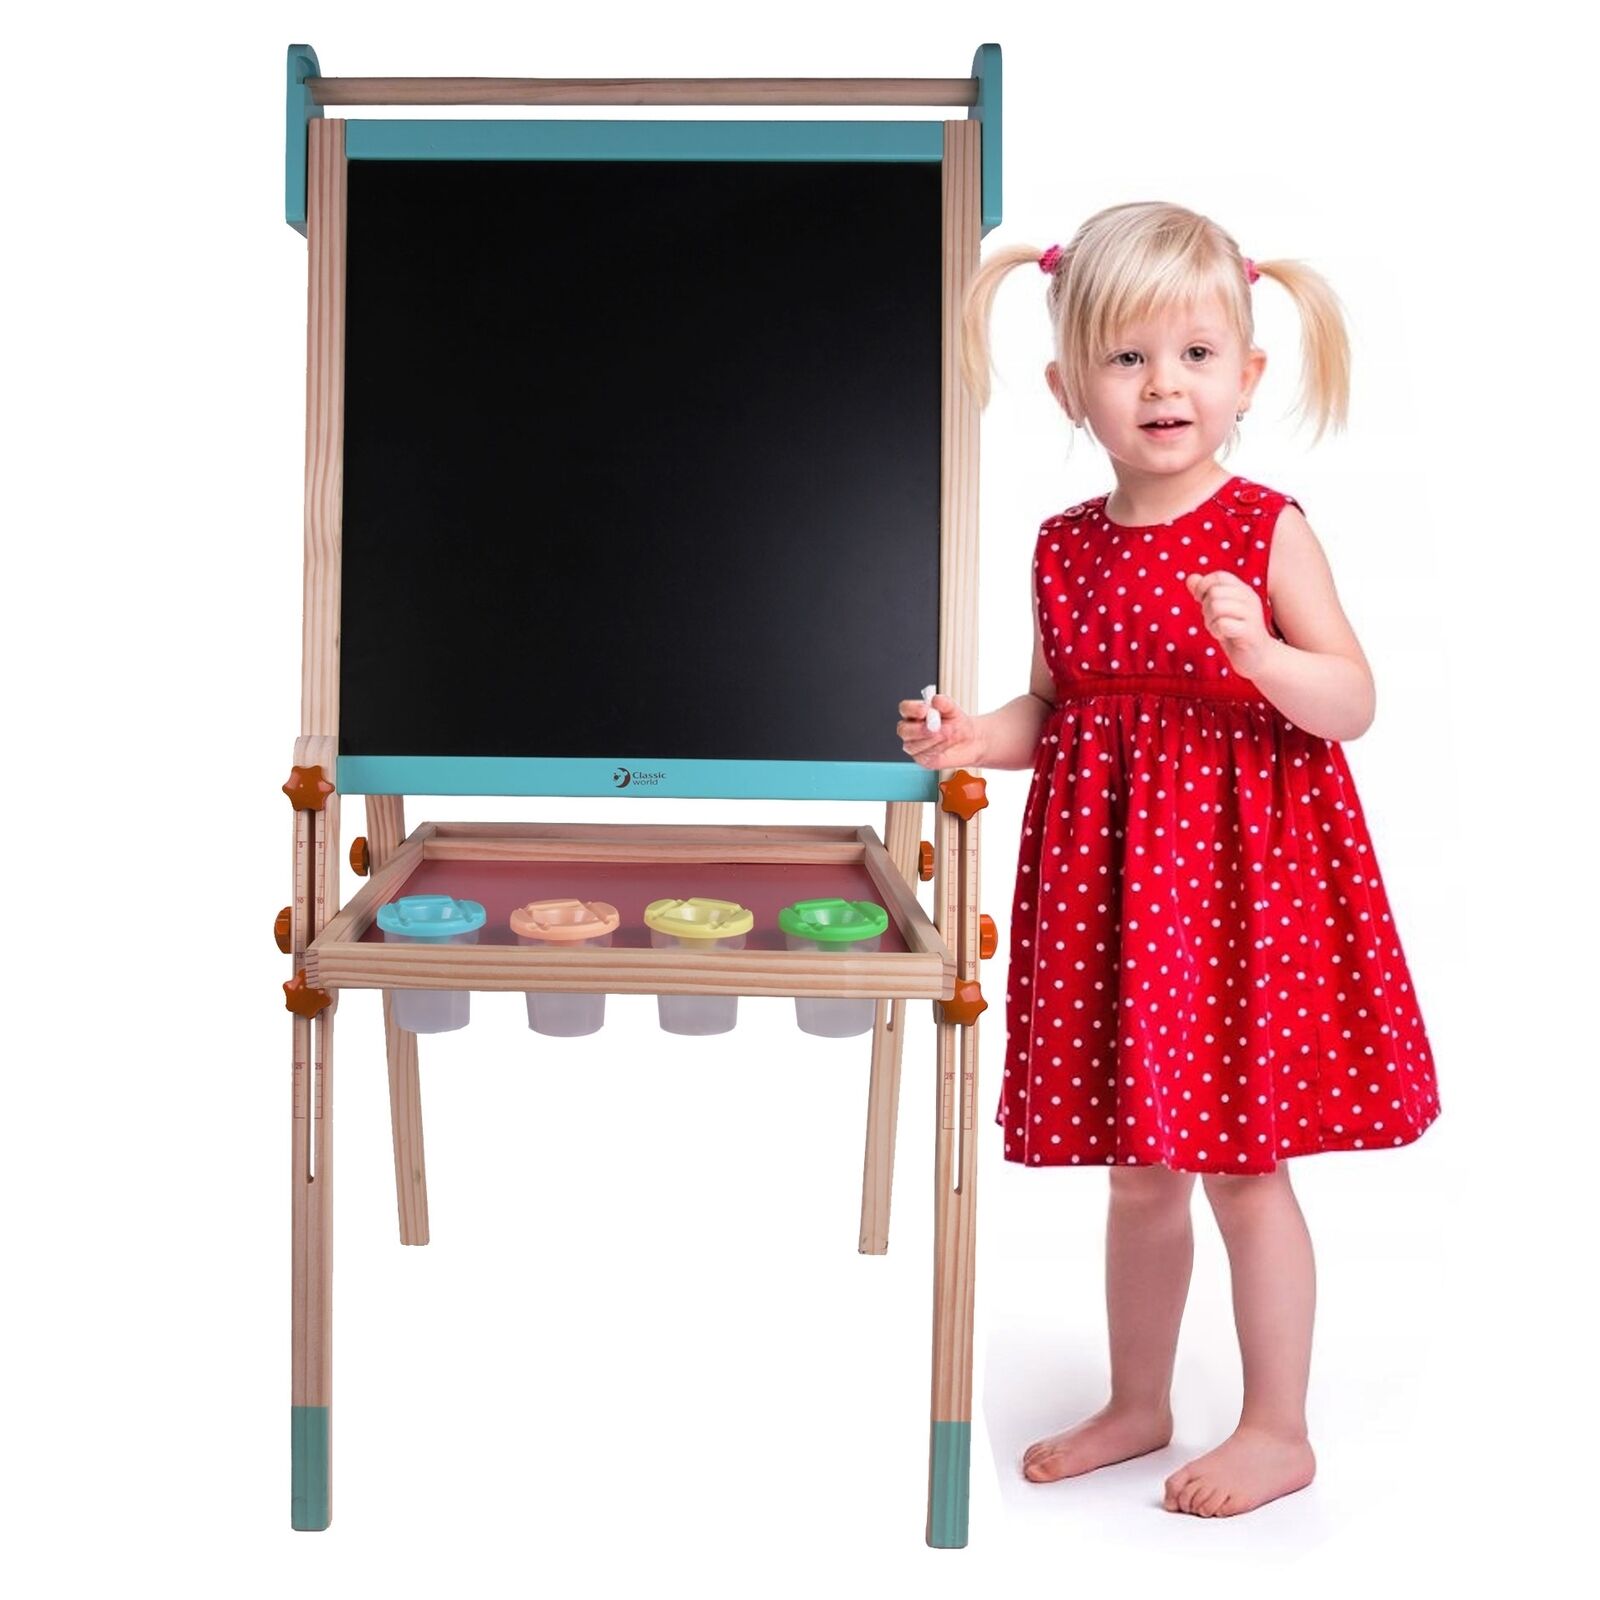 Childs wooden Easel